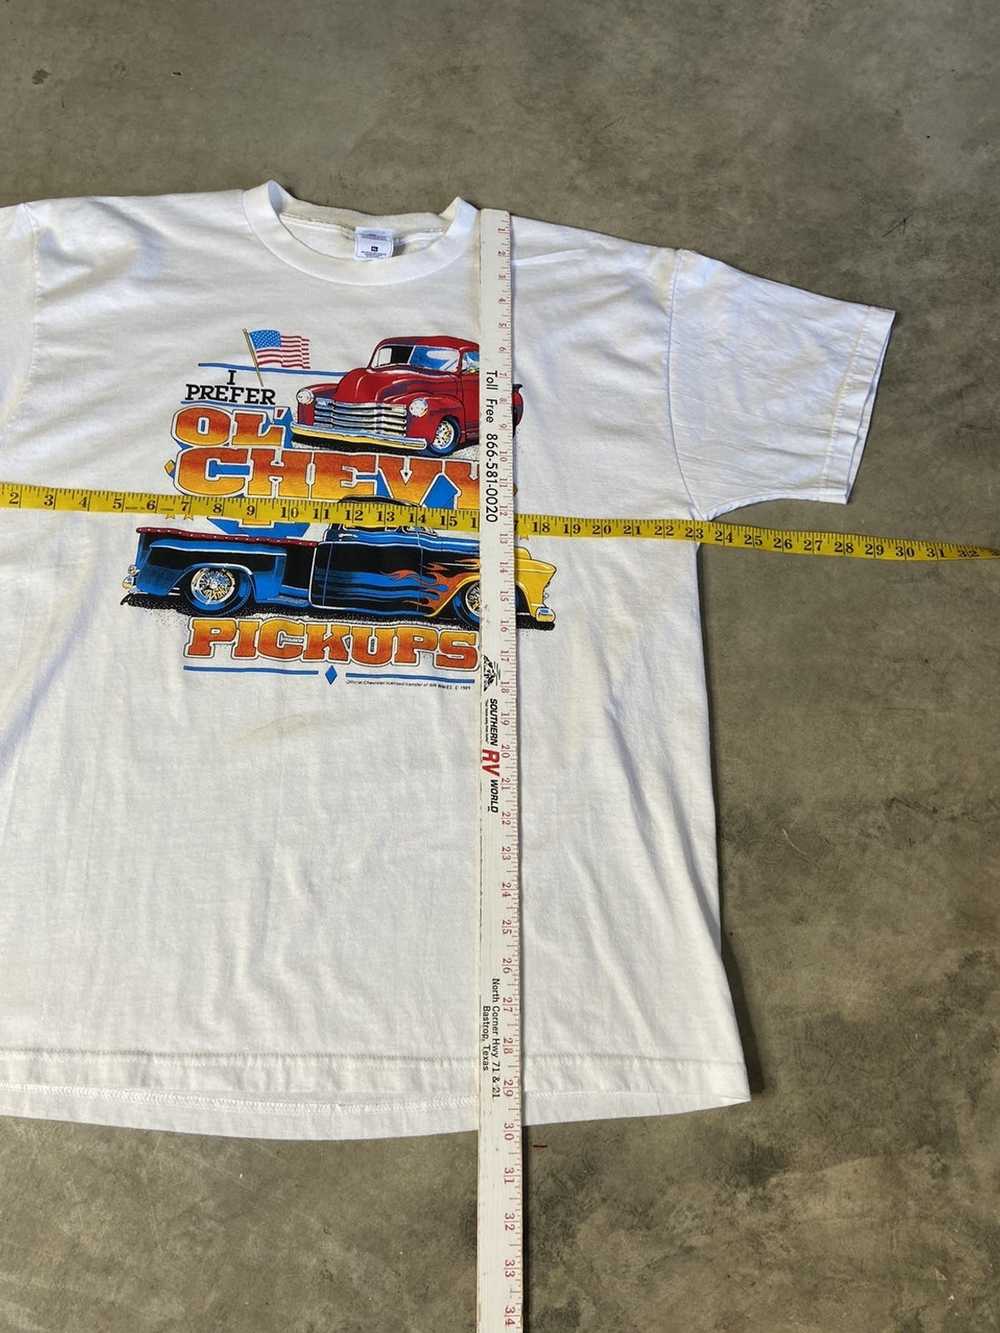 Made In Usa × Vintage Vintage Chevy Truck Tee 1989 - image 5